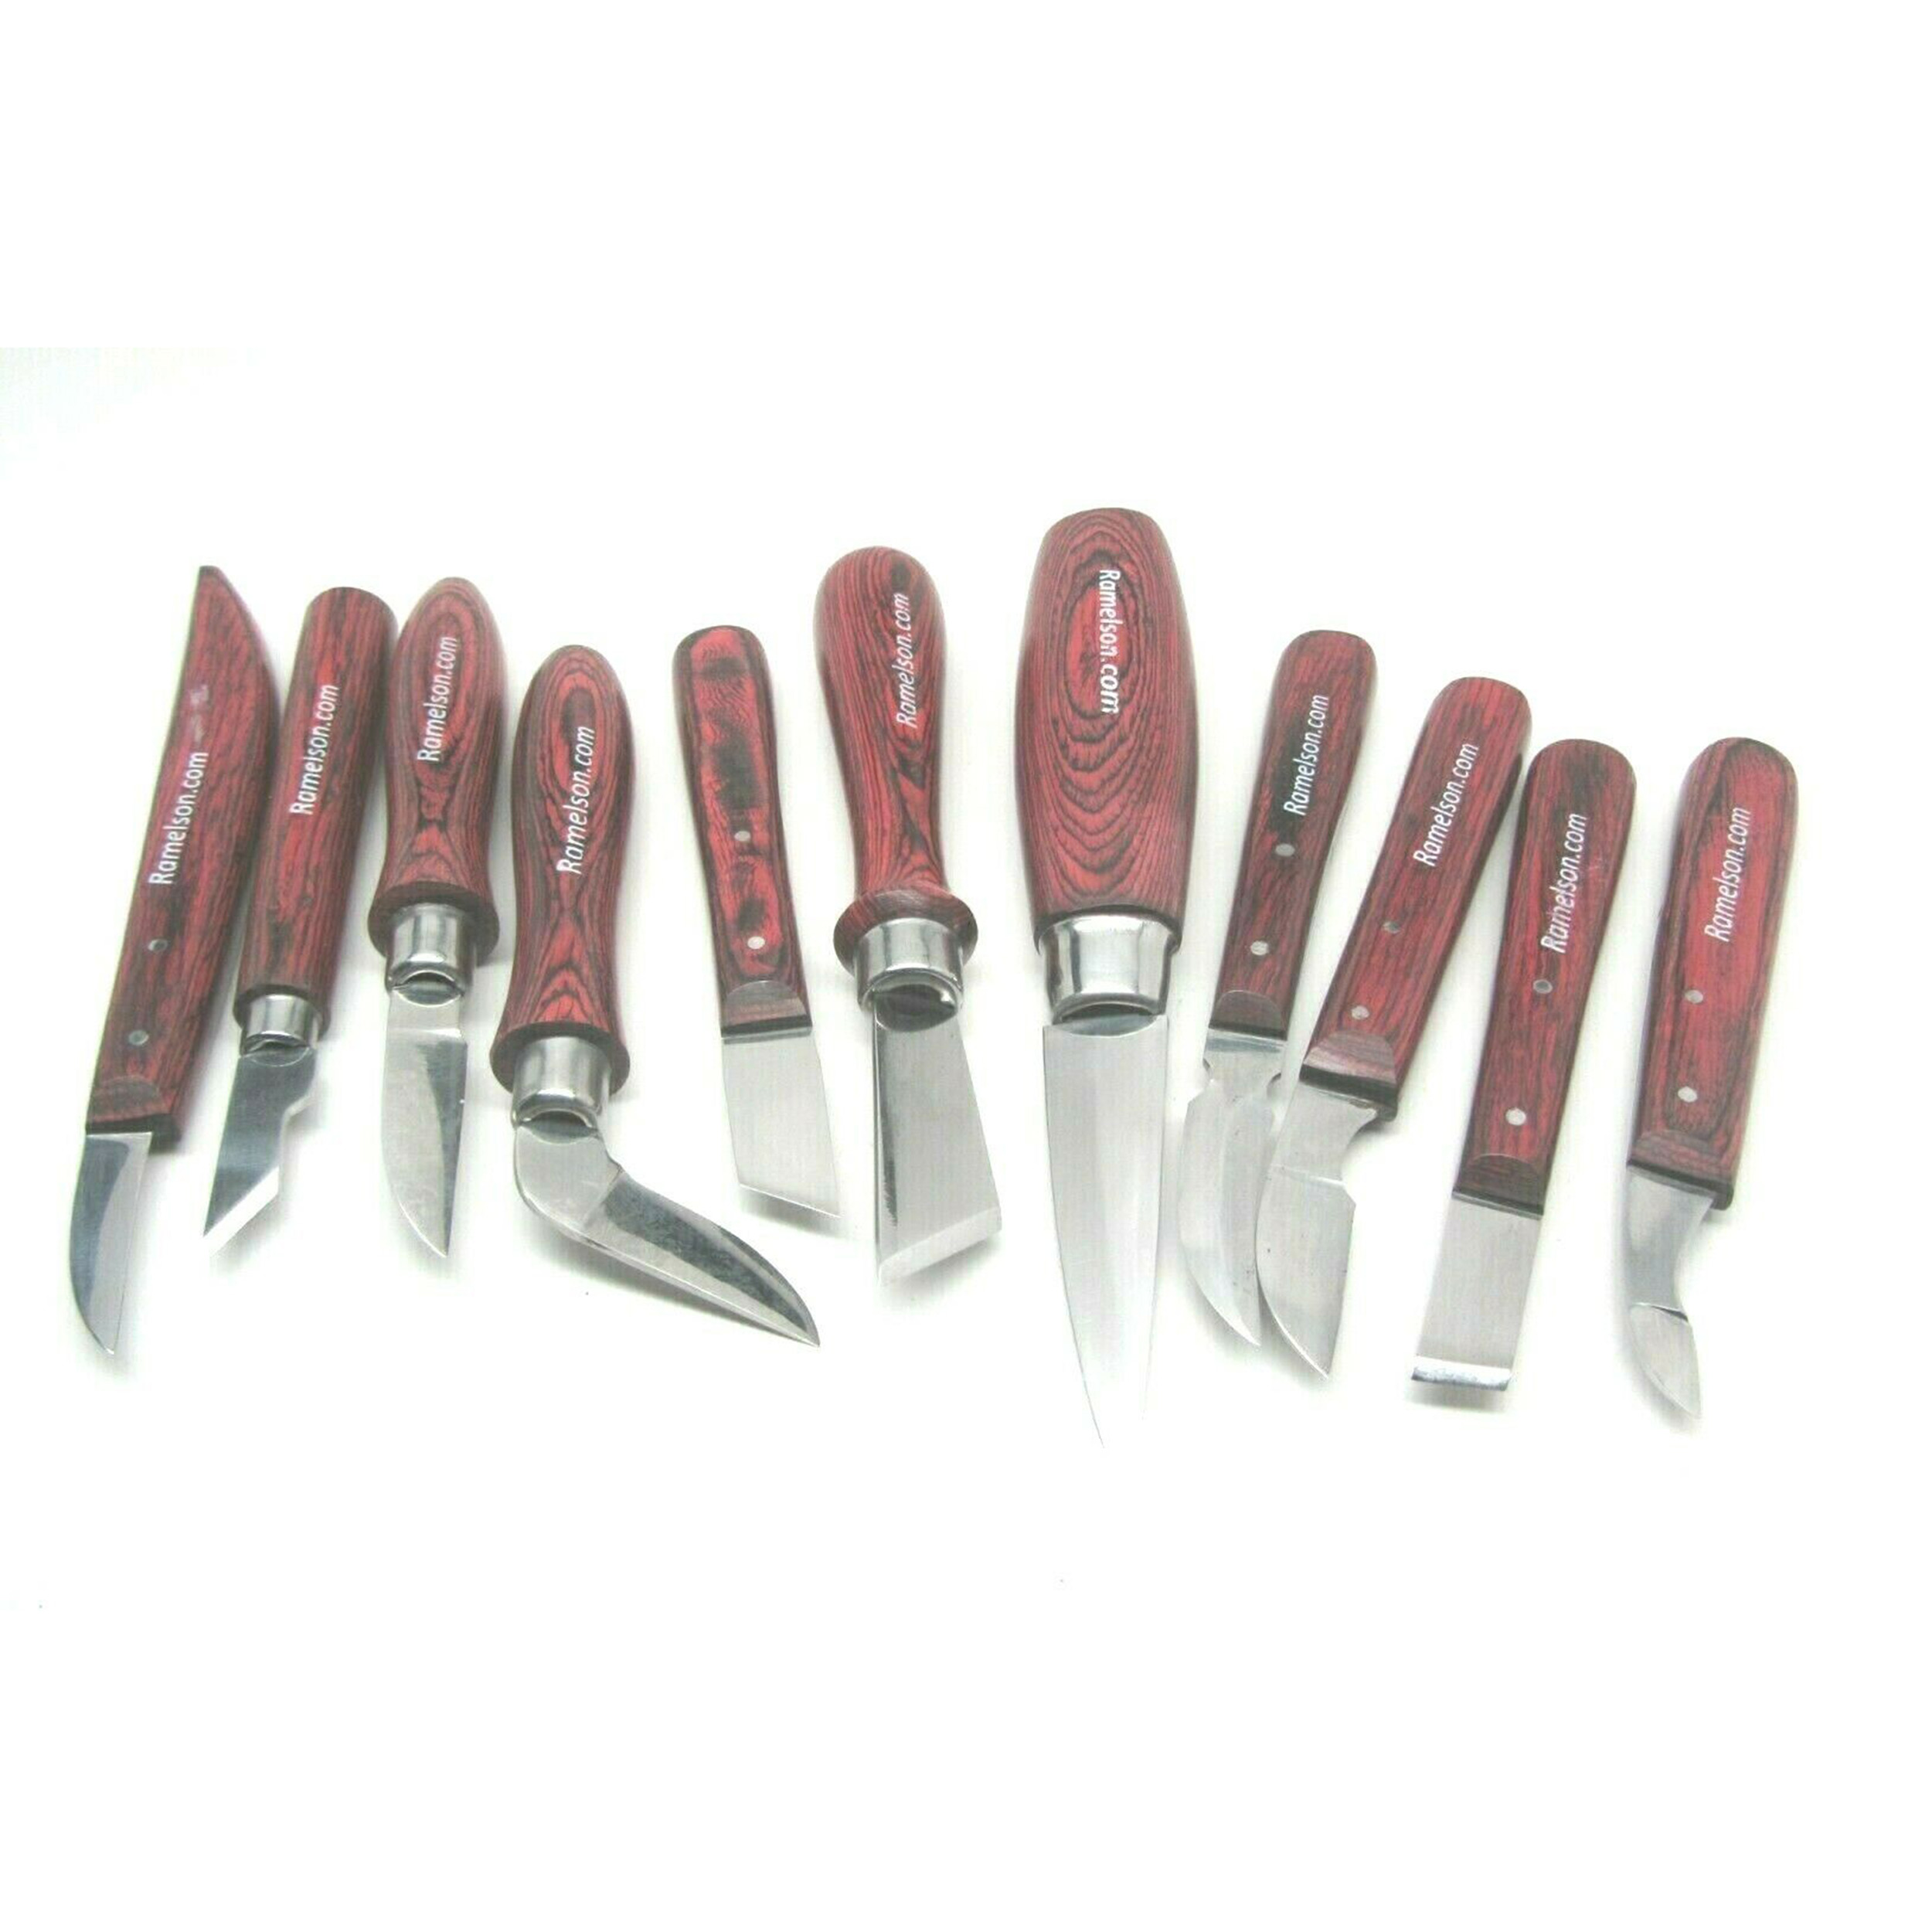 12pc Woodcarving Miscellaneous Chip Knives